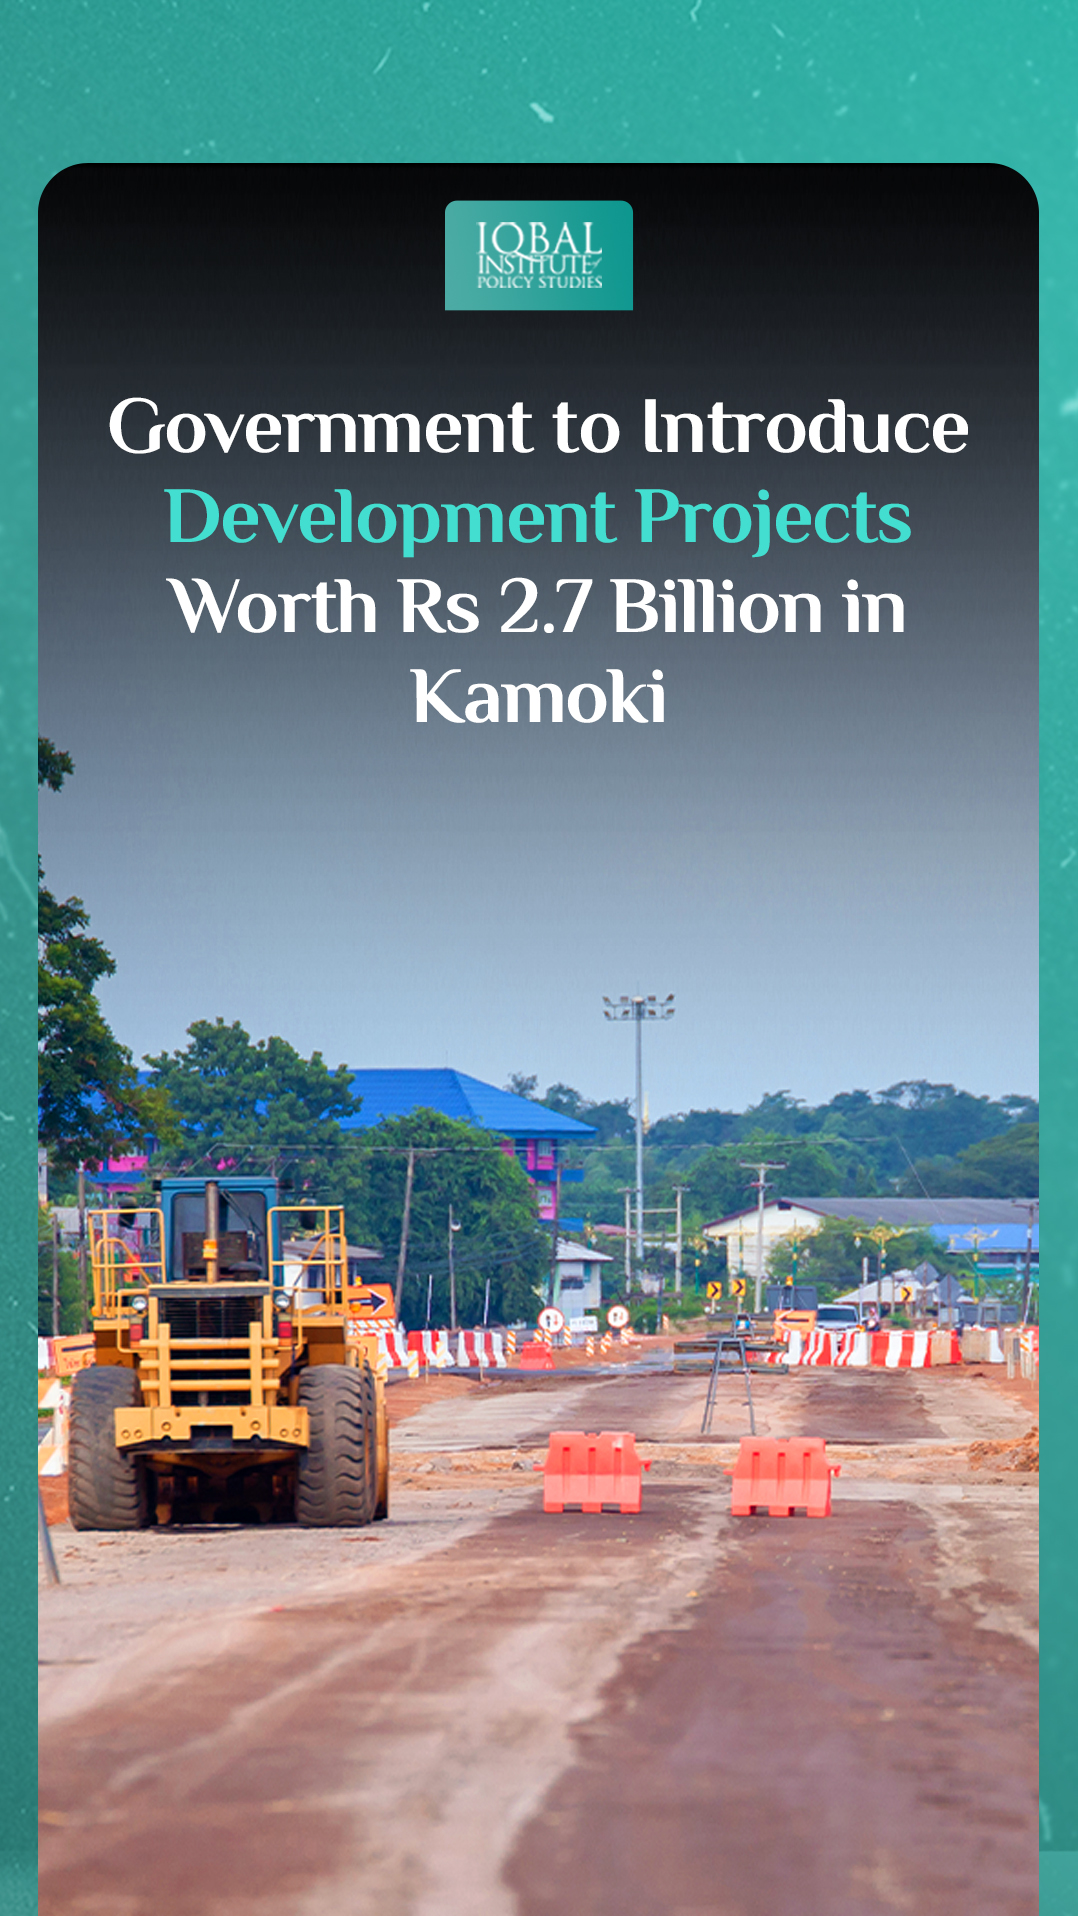 Government to Introduce Development projects worth Rs 2.7 bn in Kamoki